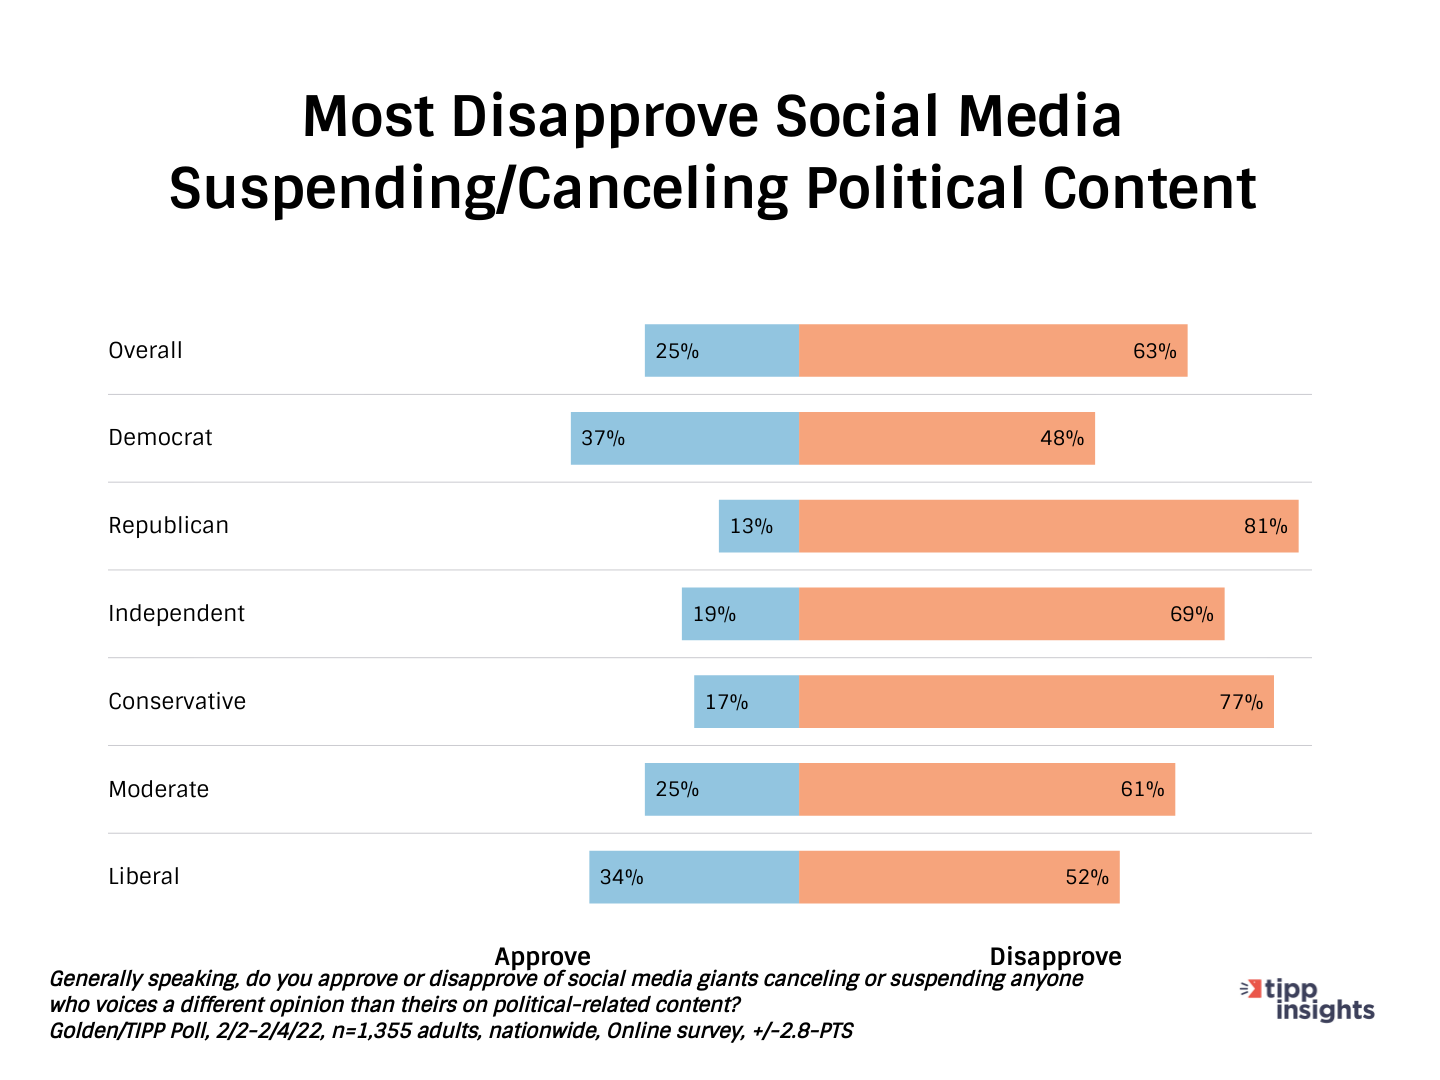 Golden/TIPP Poll Results: Most americans disapprove of social media suspending/canceling political content